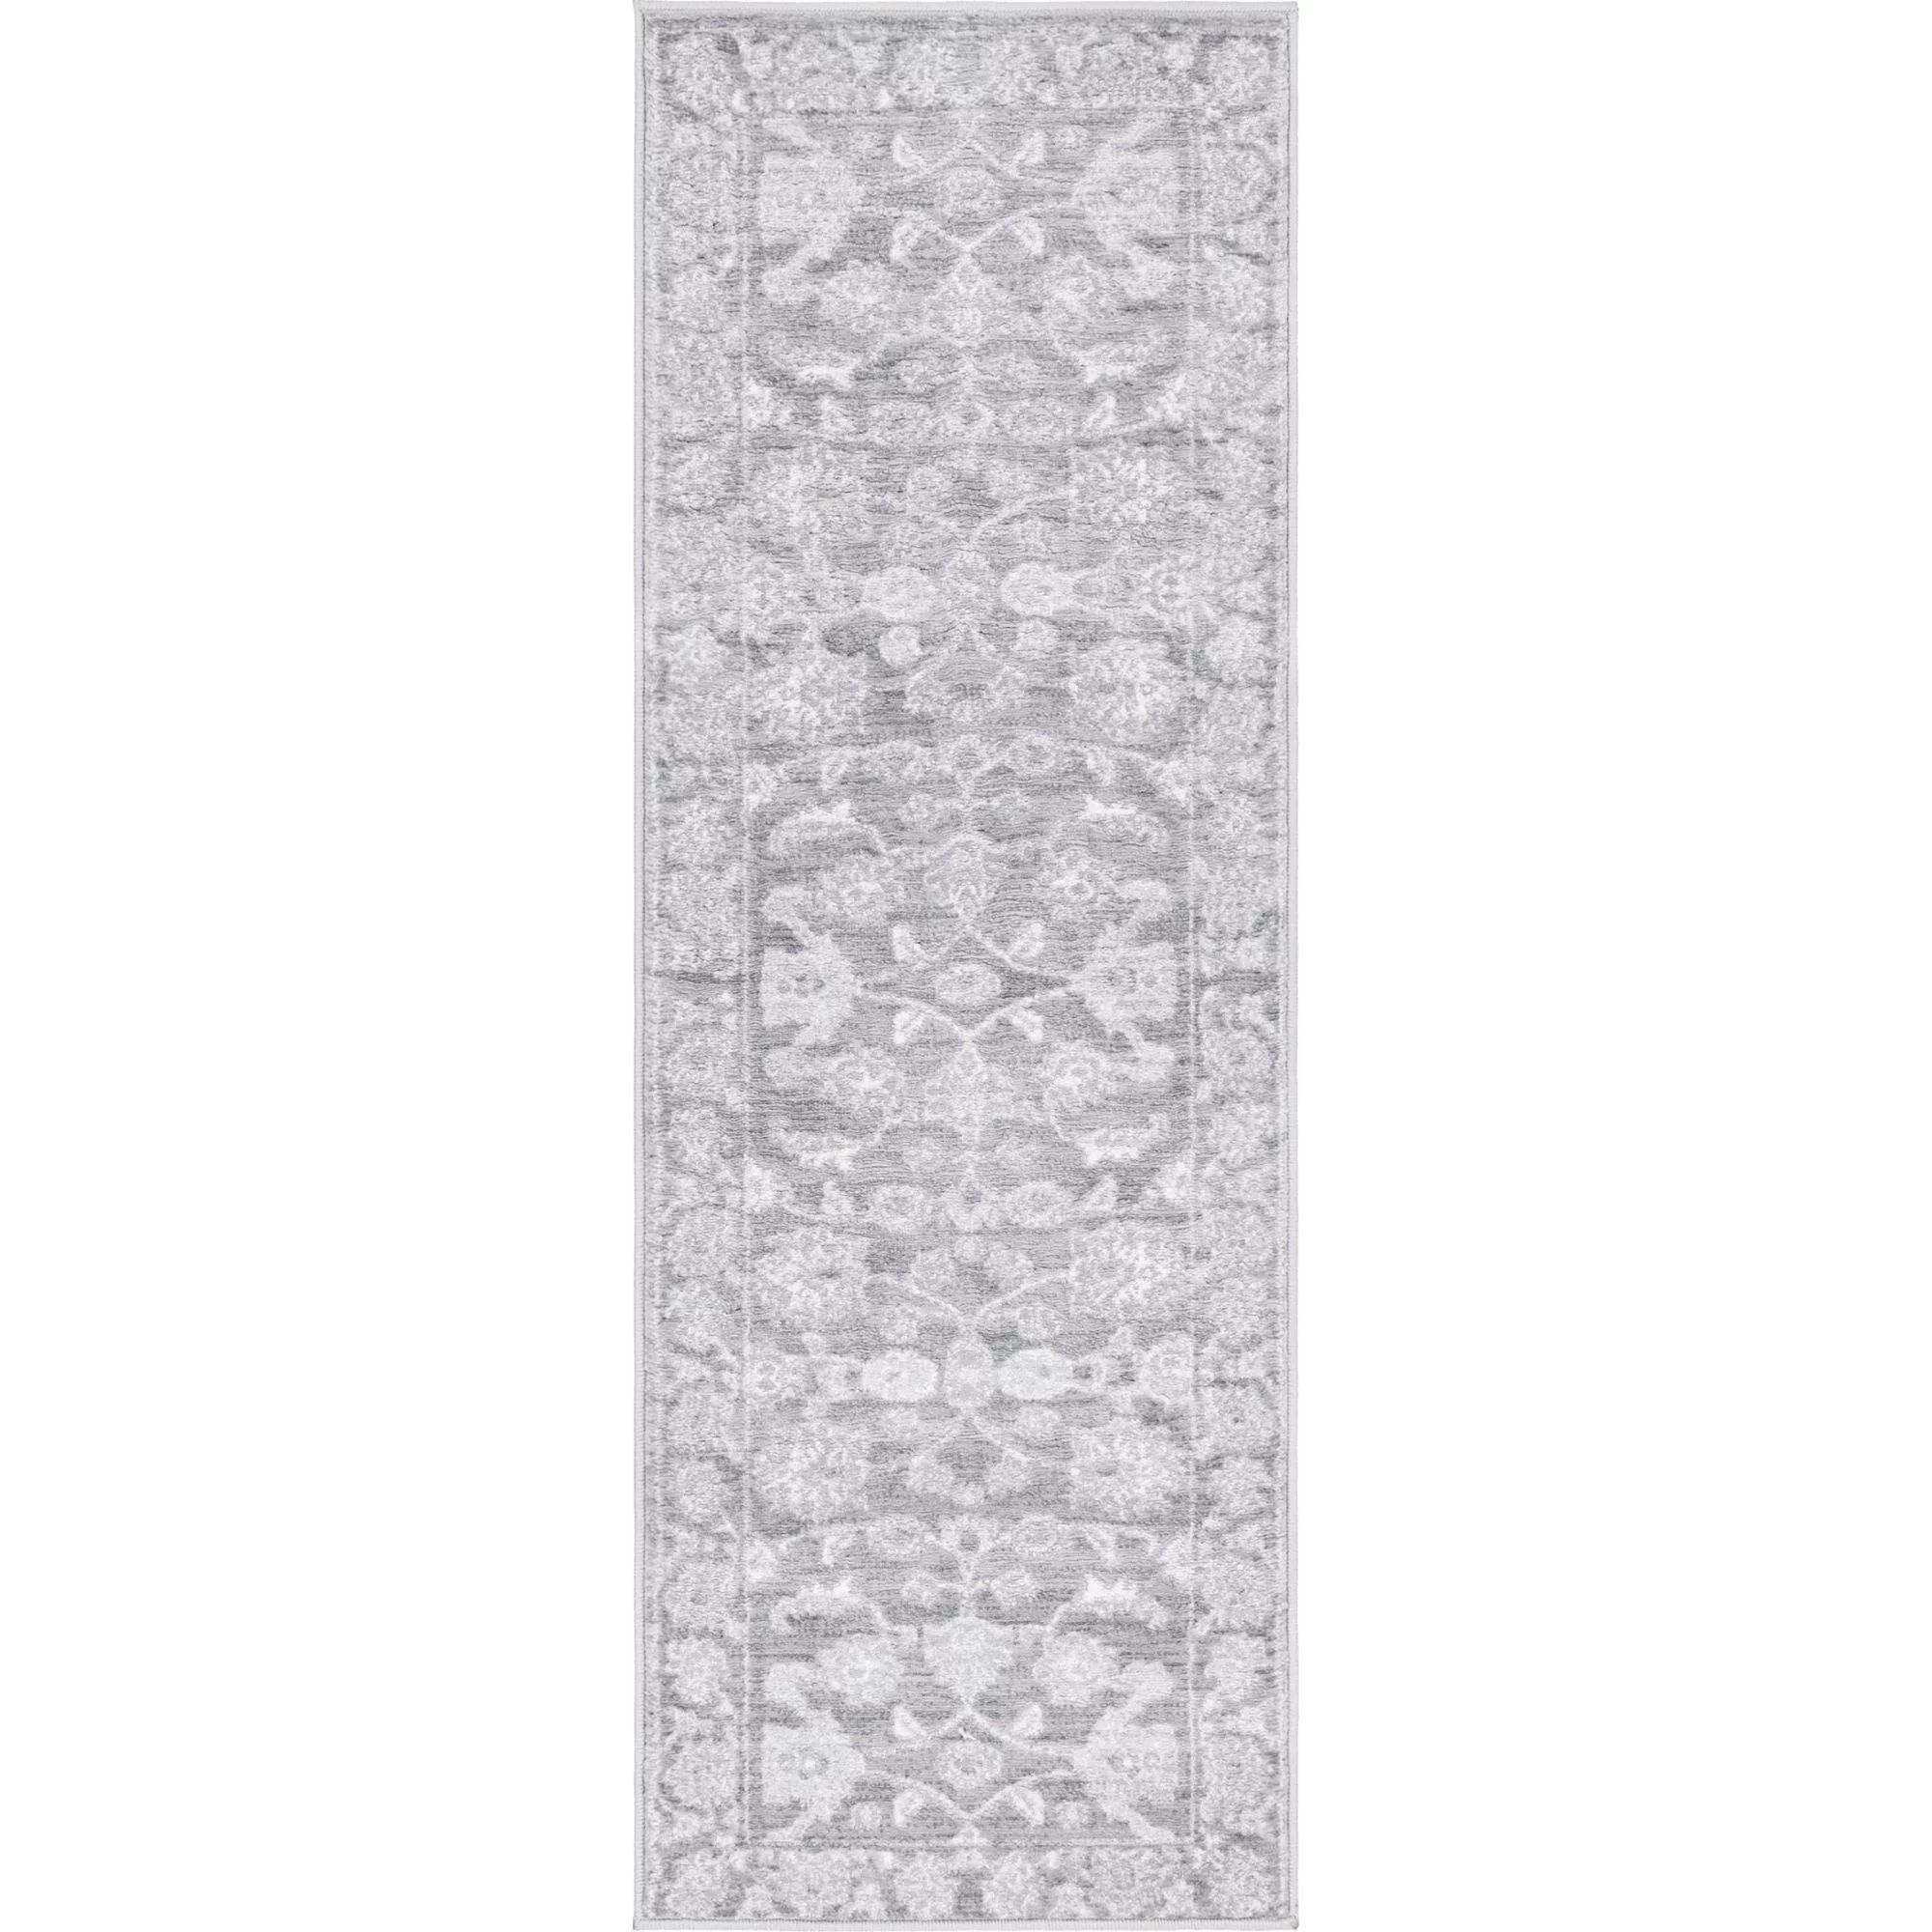 2' x 6' Gray and Ivory Traditional Floral Rectangular Rug Runner | Walmart (US)